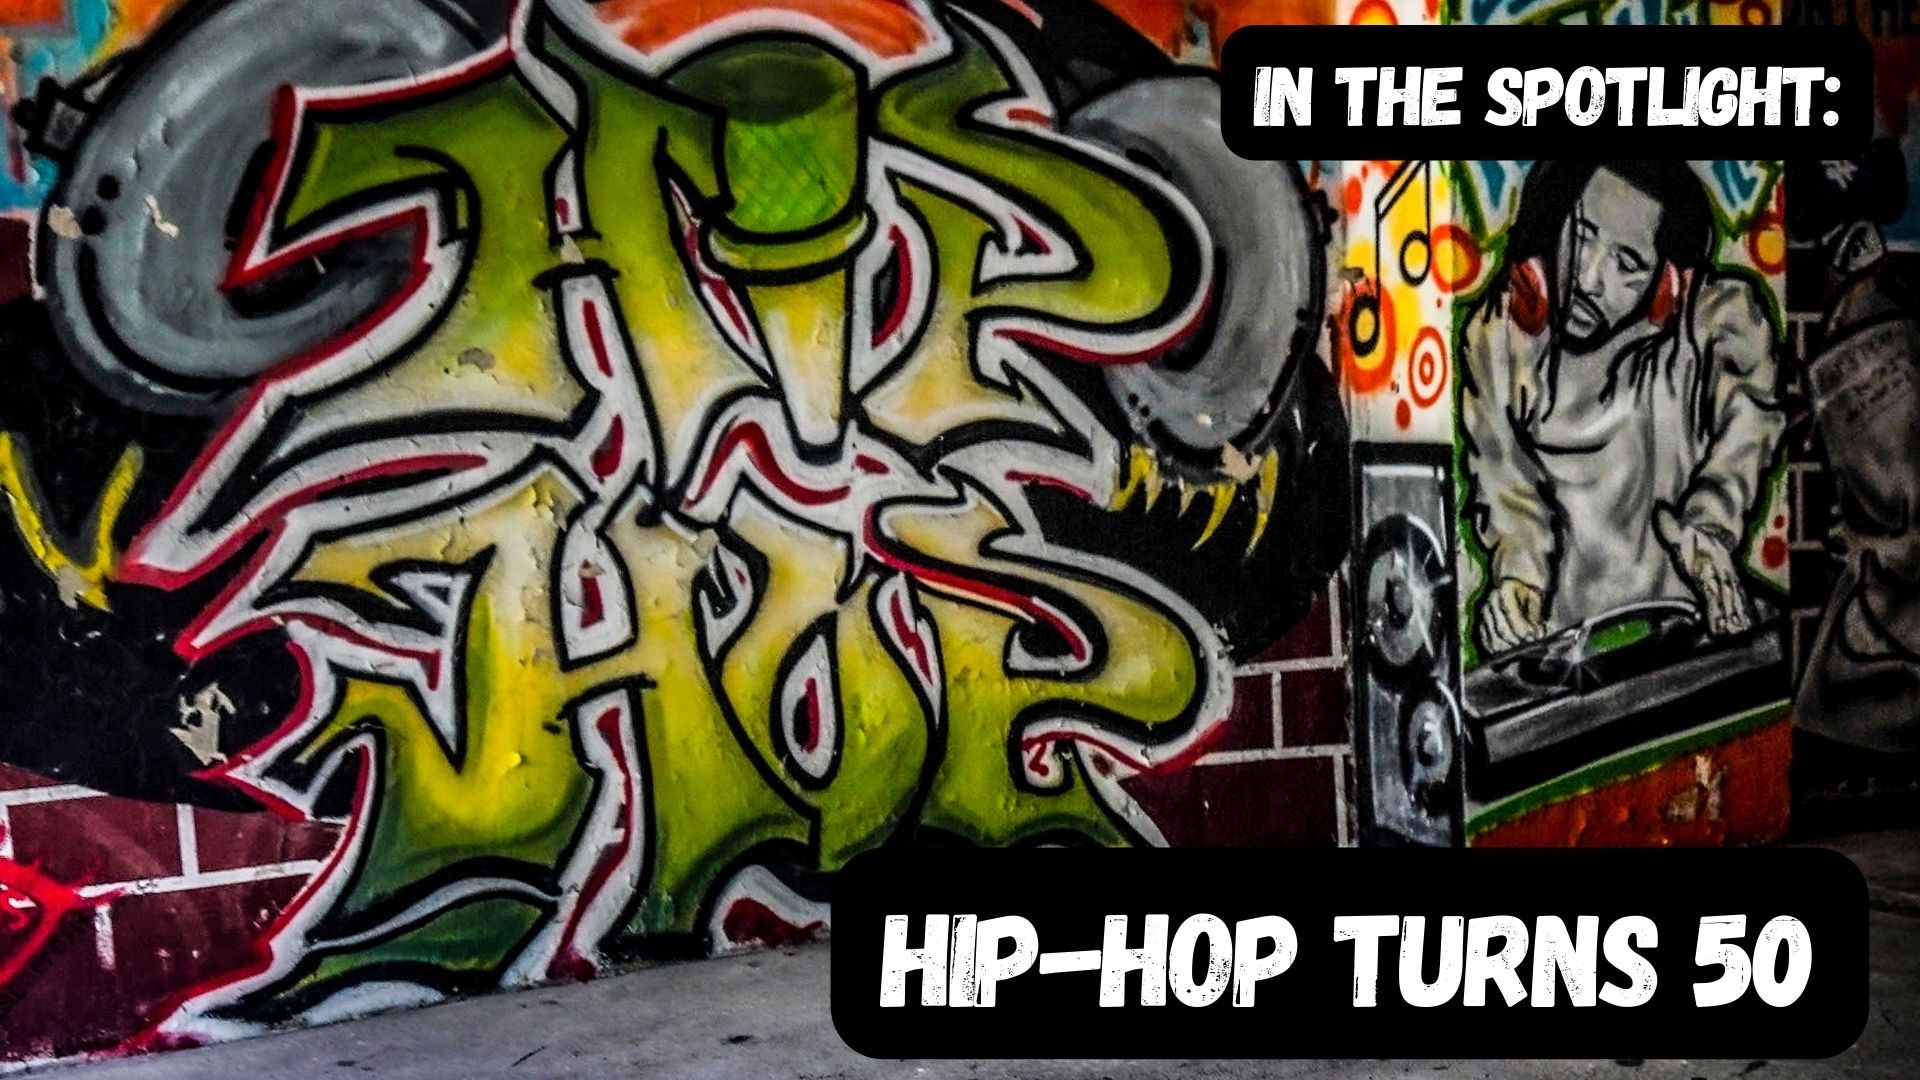 August 11, 2023 marks 50 years of hip-hop. In the spotlight takes a look at the history of hip-hop music and hears how other artists have been inspired.